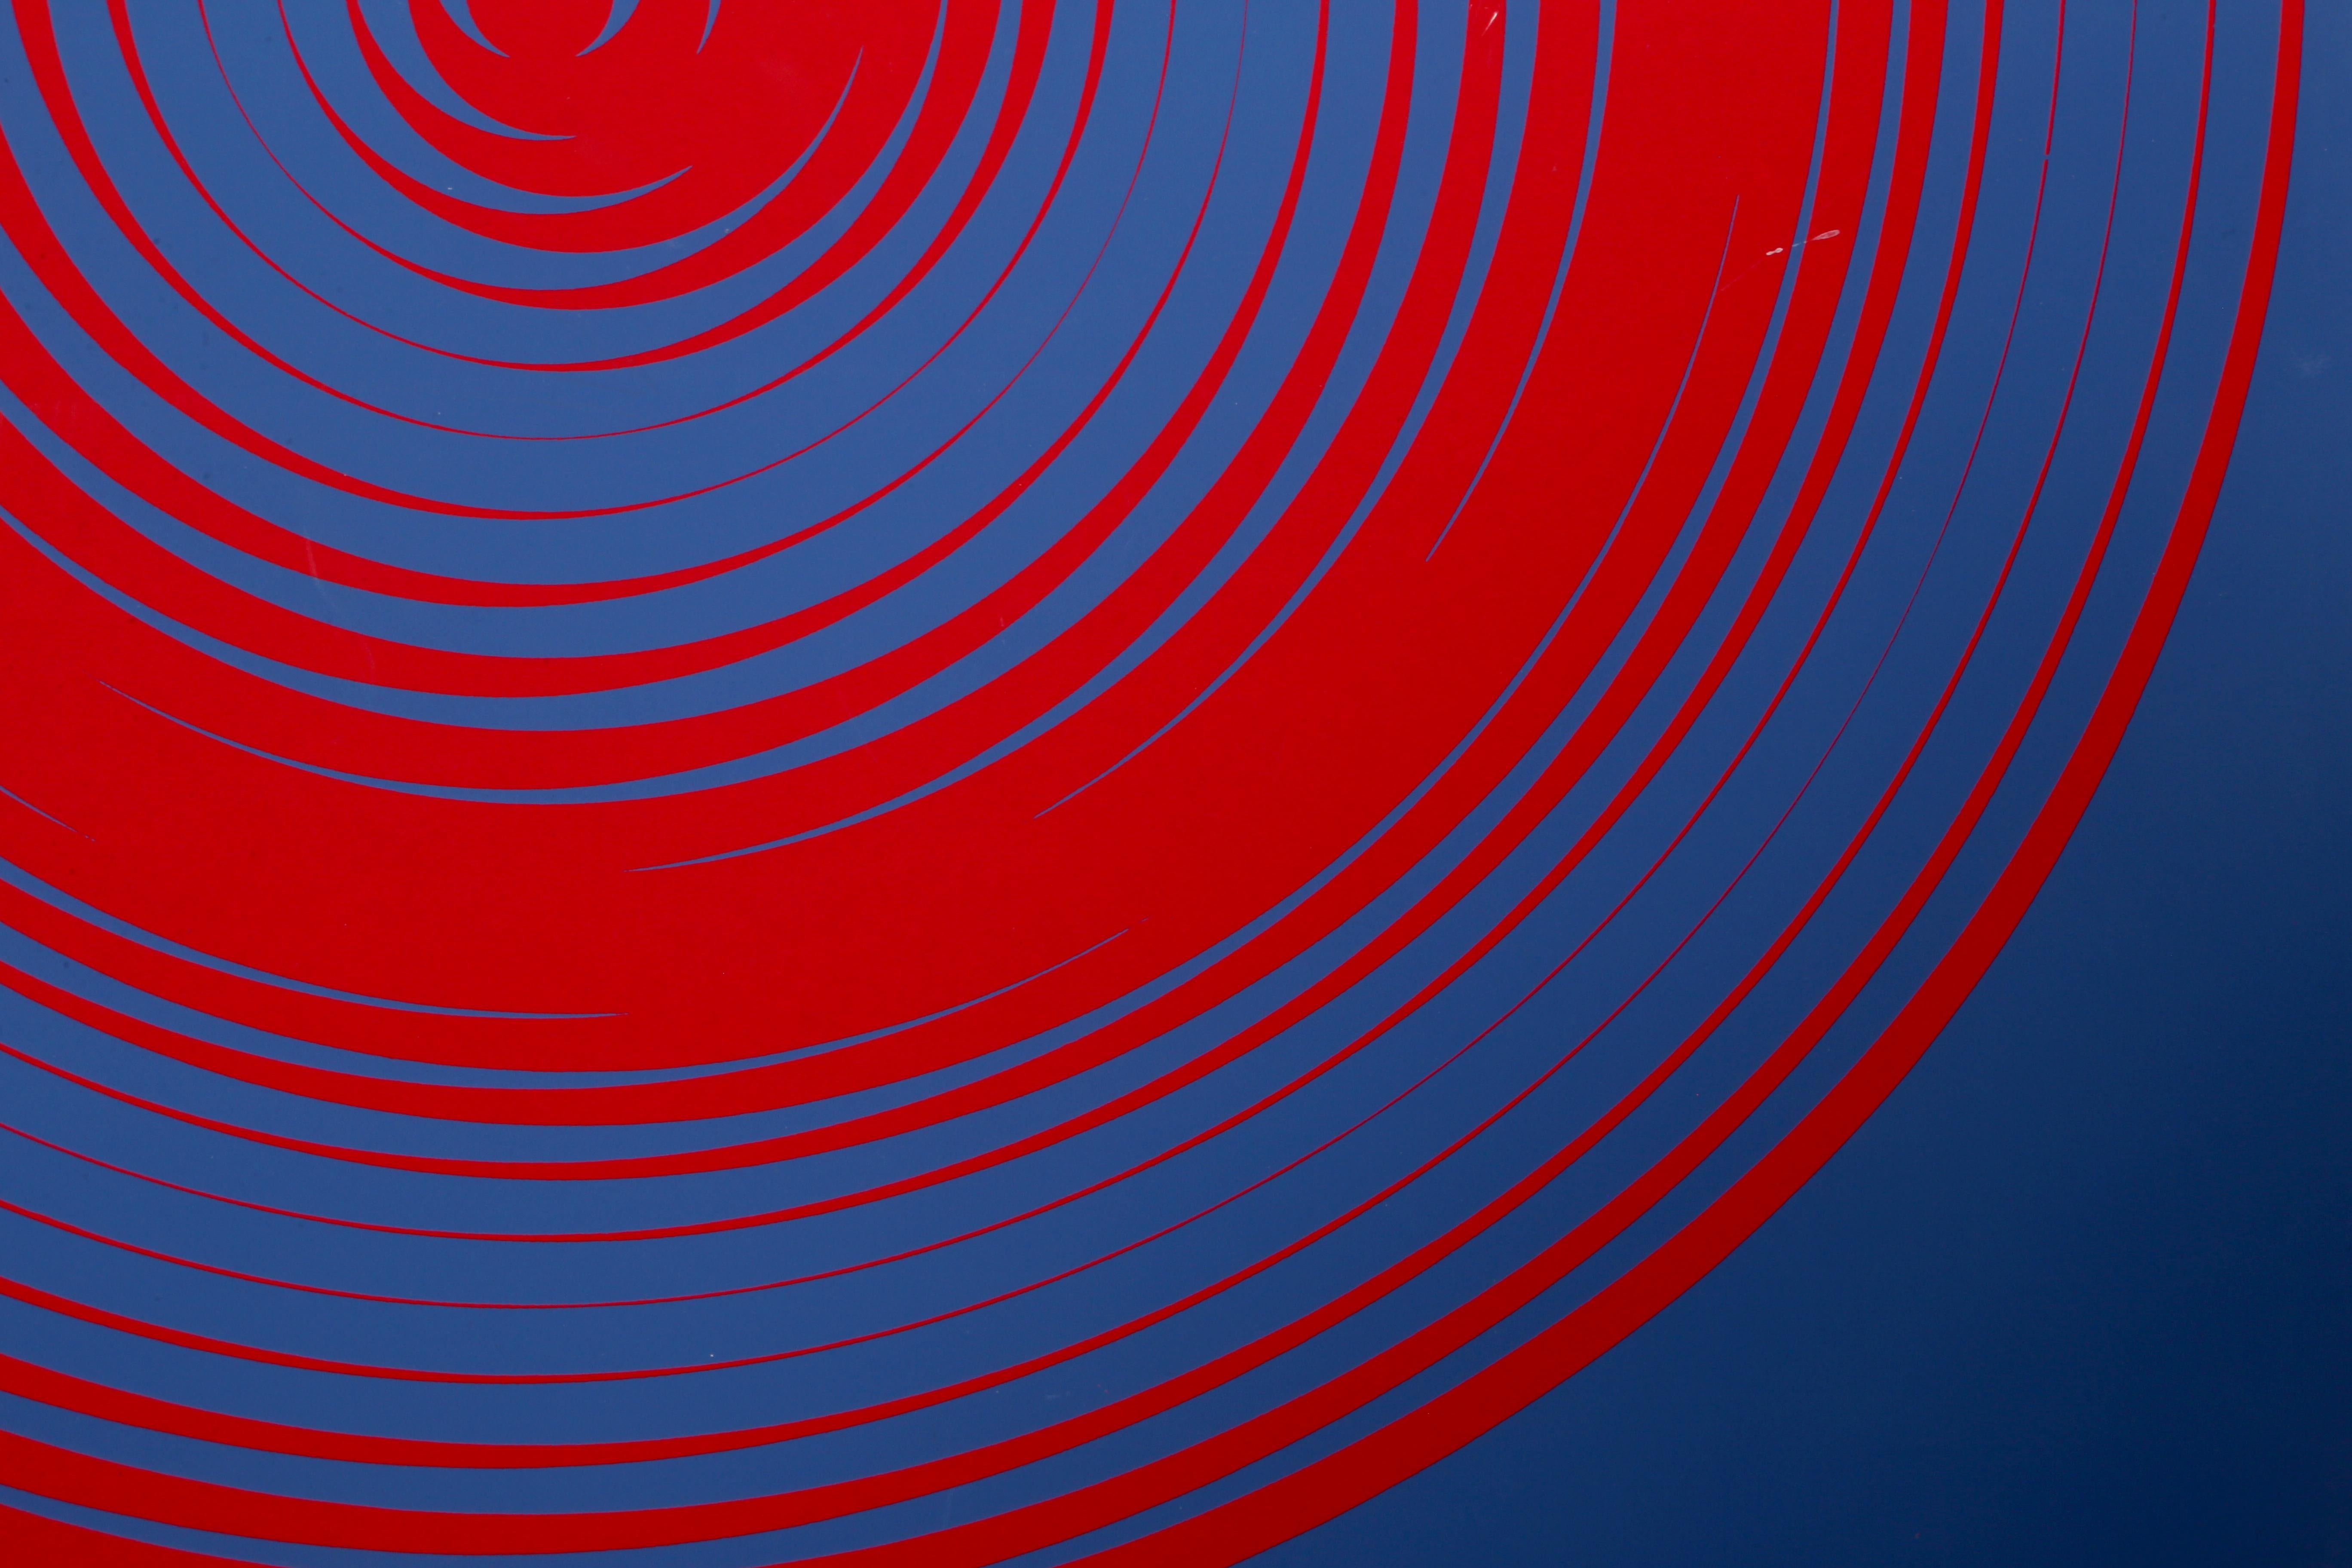 Blue and Red Spirals - Print by Getulio Alviani